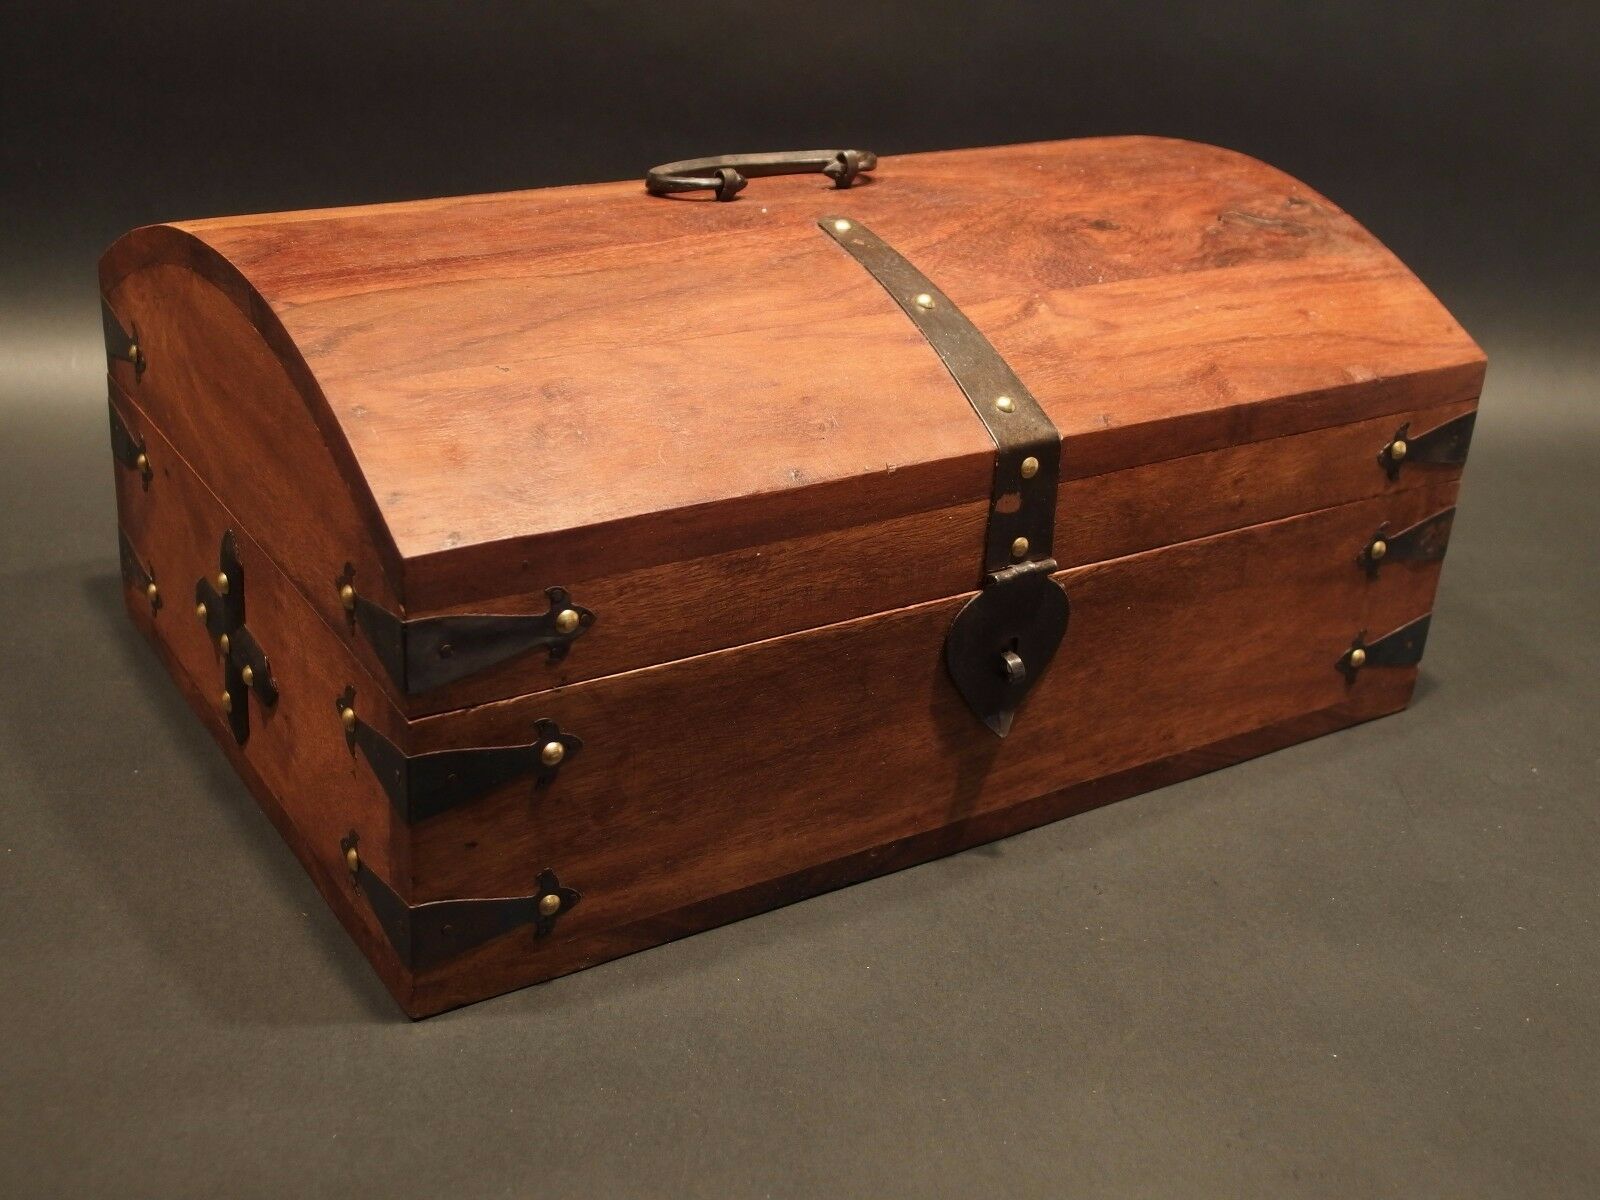 Antique Vintage Style Dome Top Document Travel Writing Wood Desk Trunk Box HEAVY - Early Home Decor